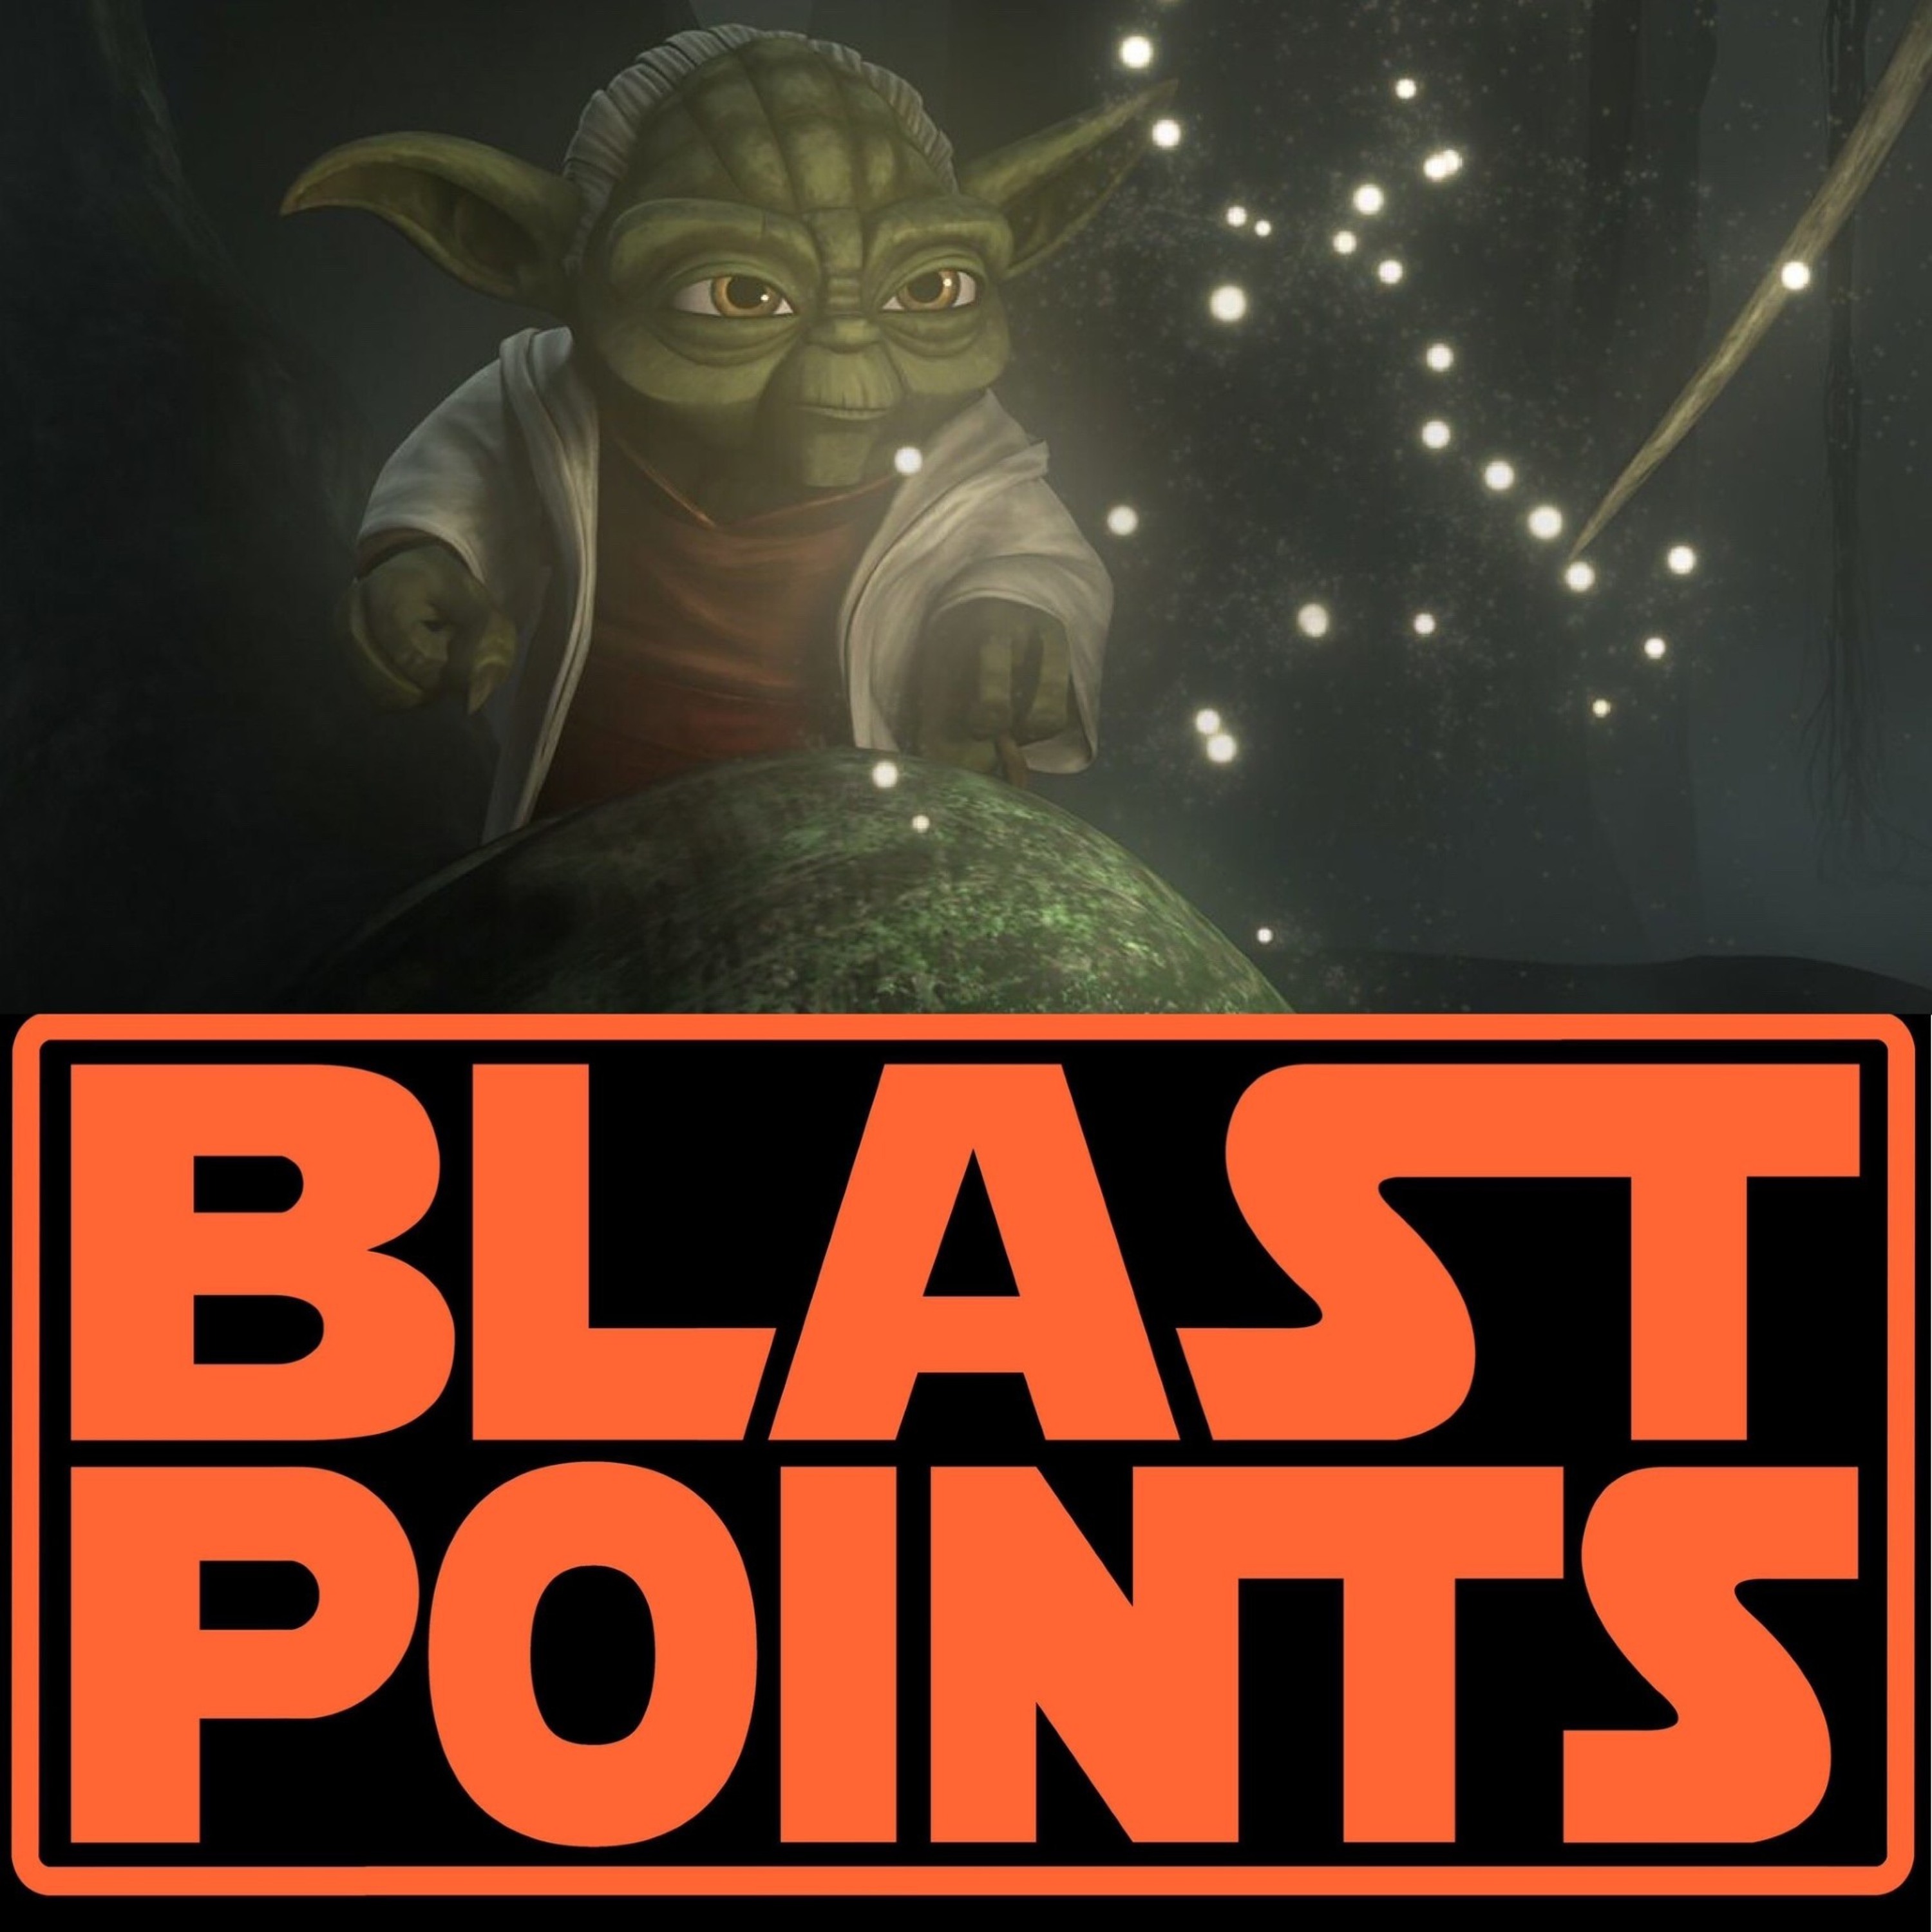 Episode 398 - The Yoda Arc Of The Covenant